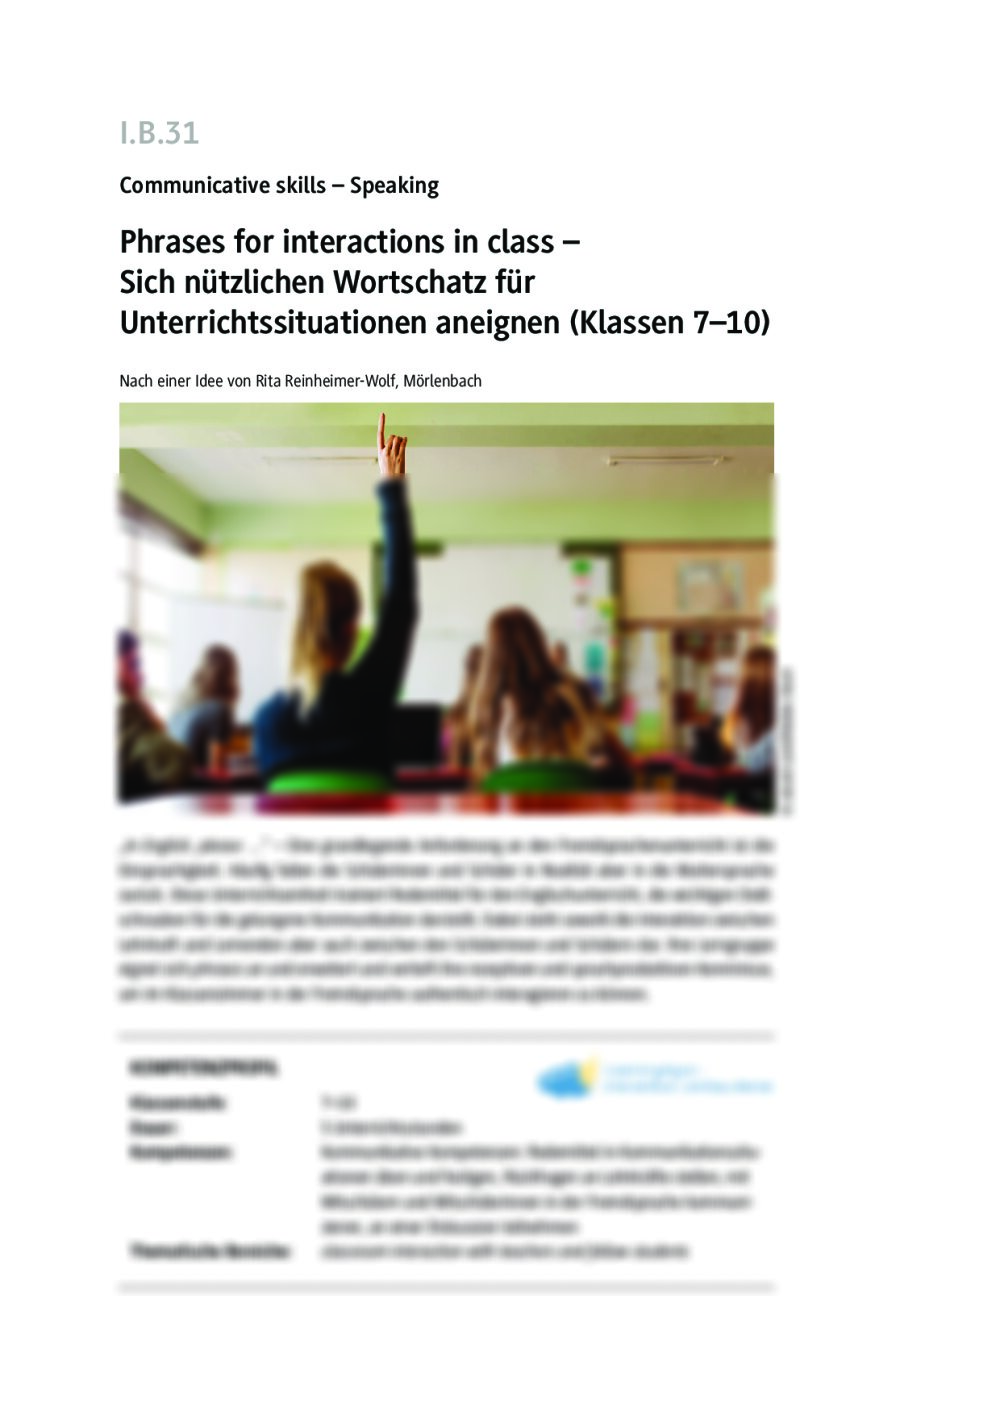 Phrases for interactions in class - Seite 1